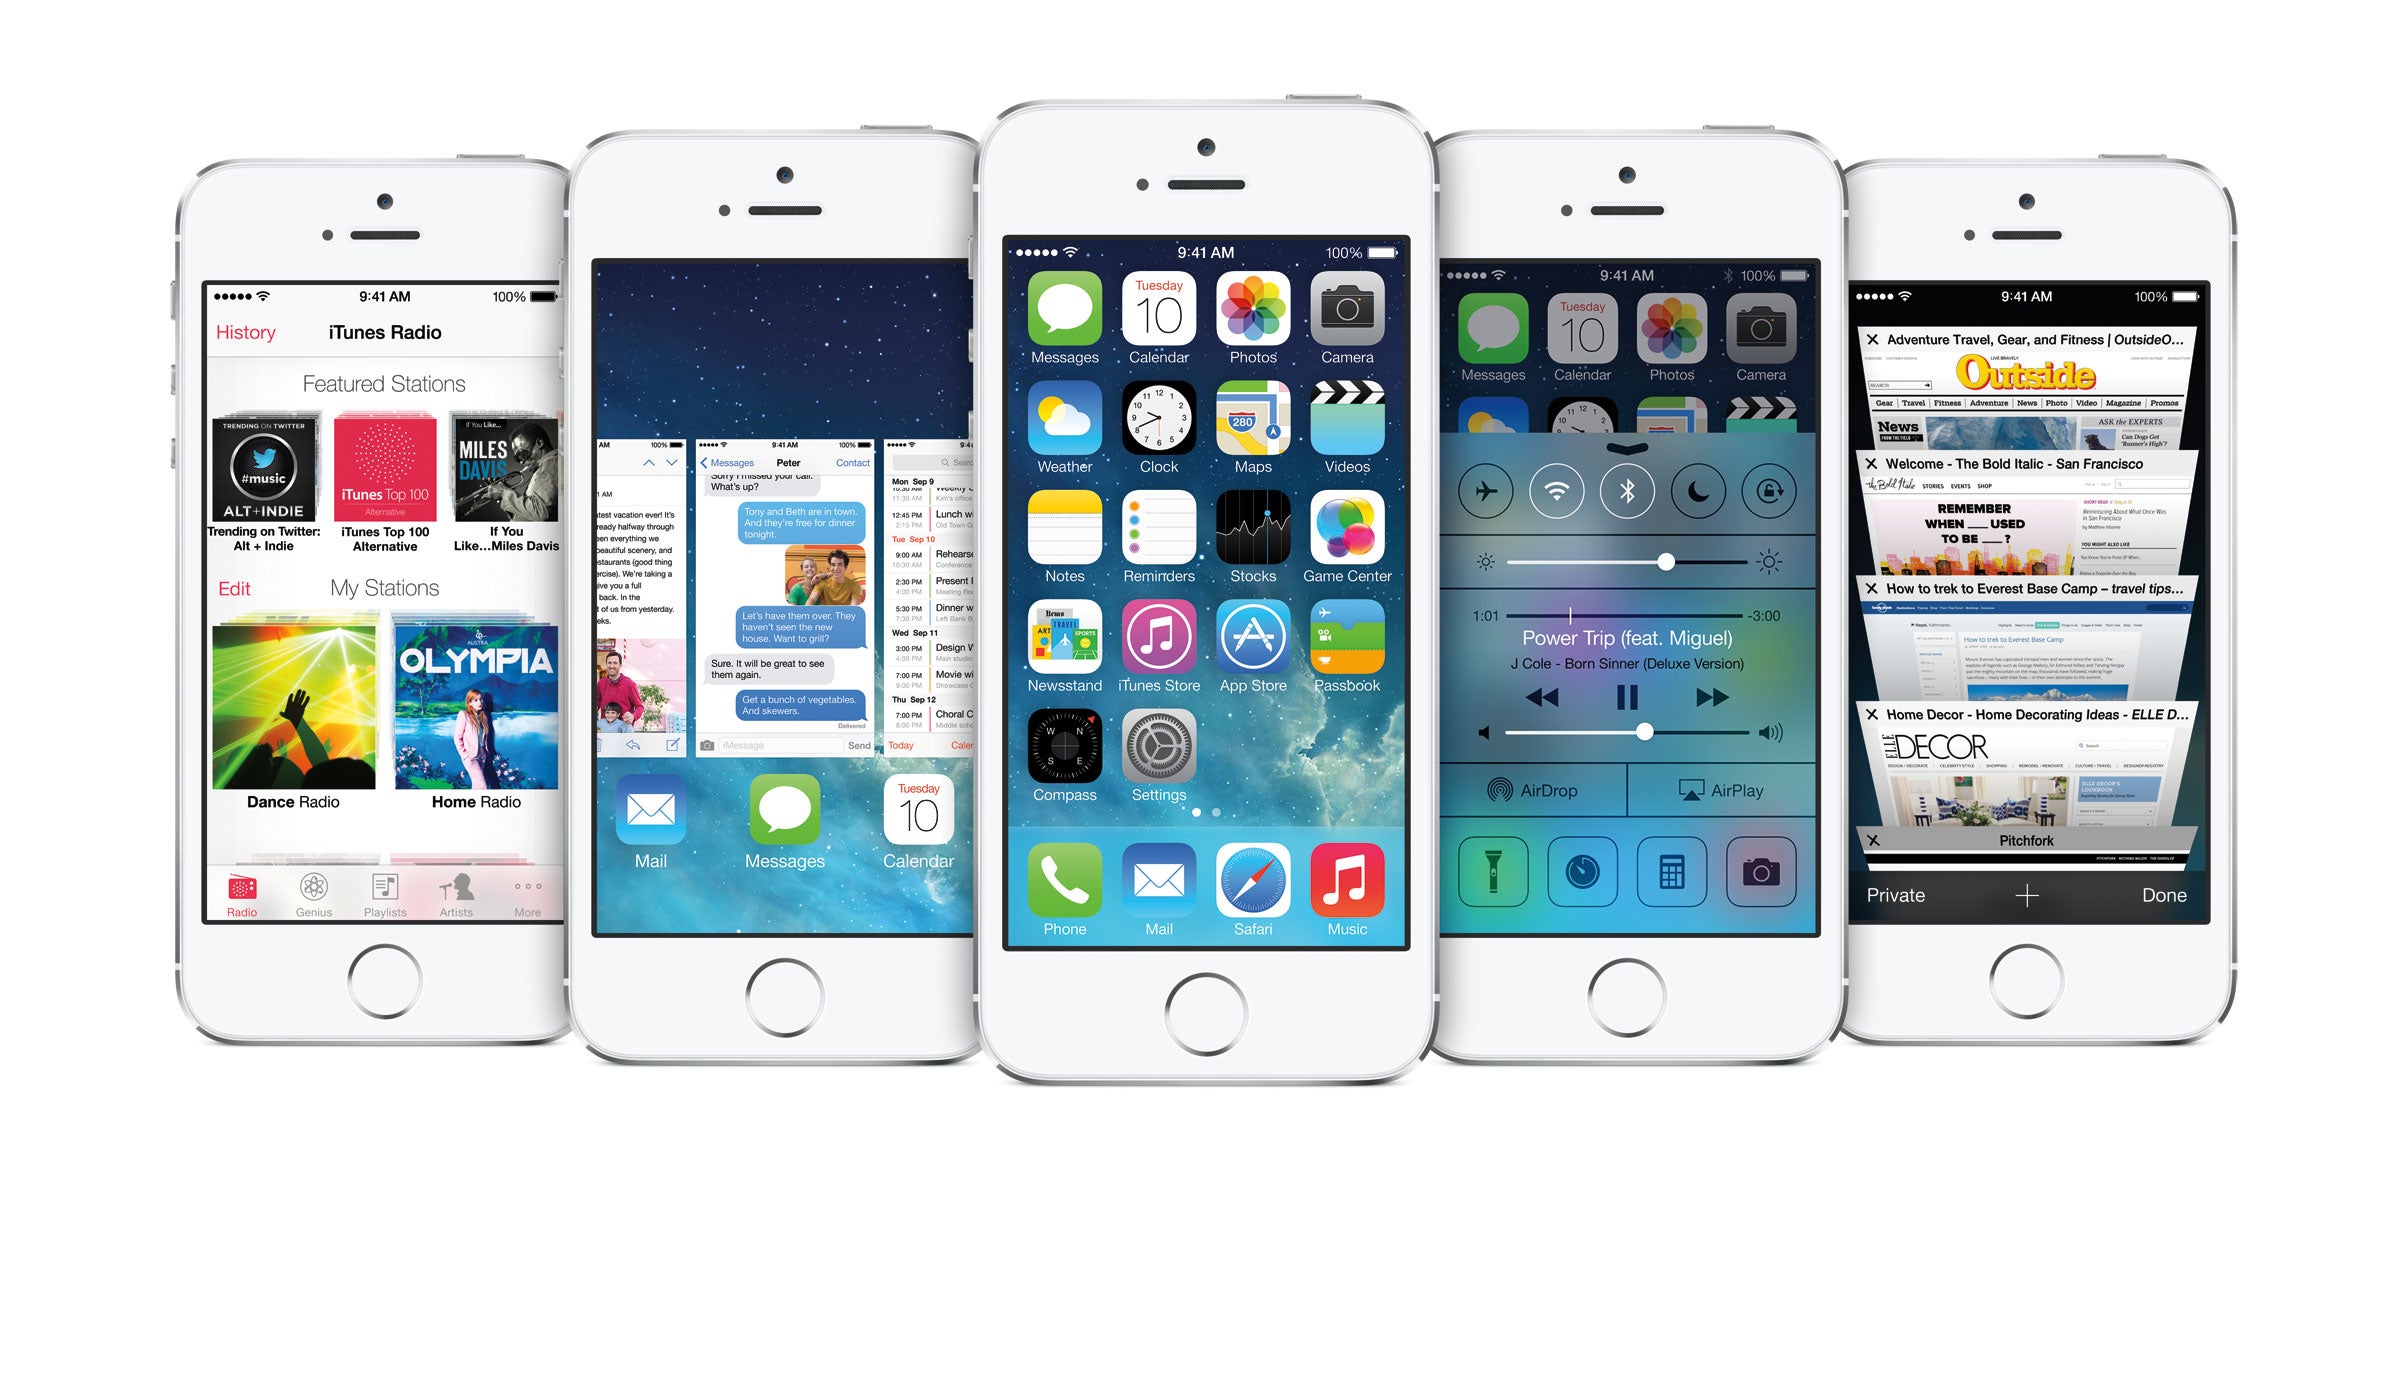 iOS 7 will be available on selected iOS devices, as well as the latest iPhones - the 5S and the 5C.